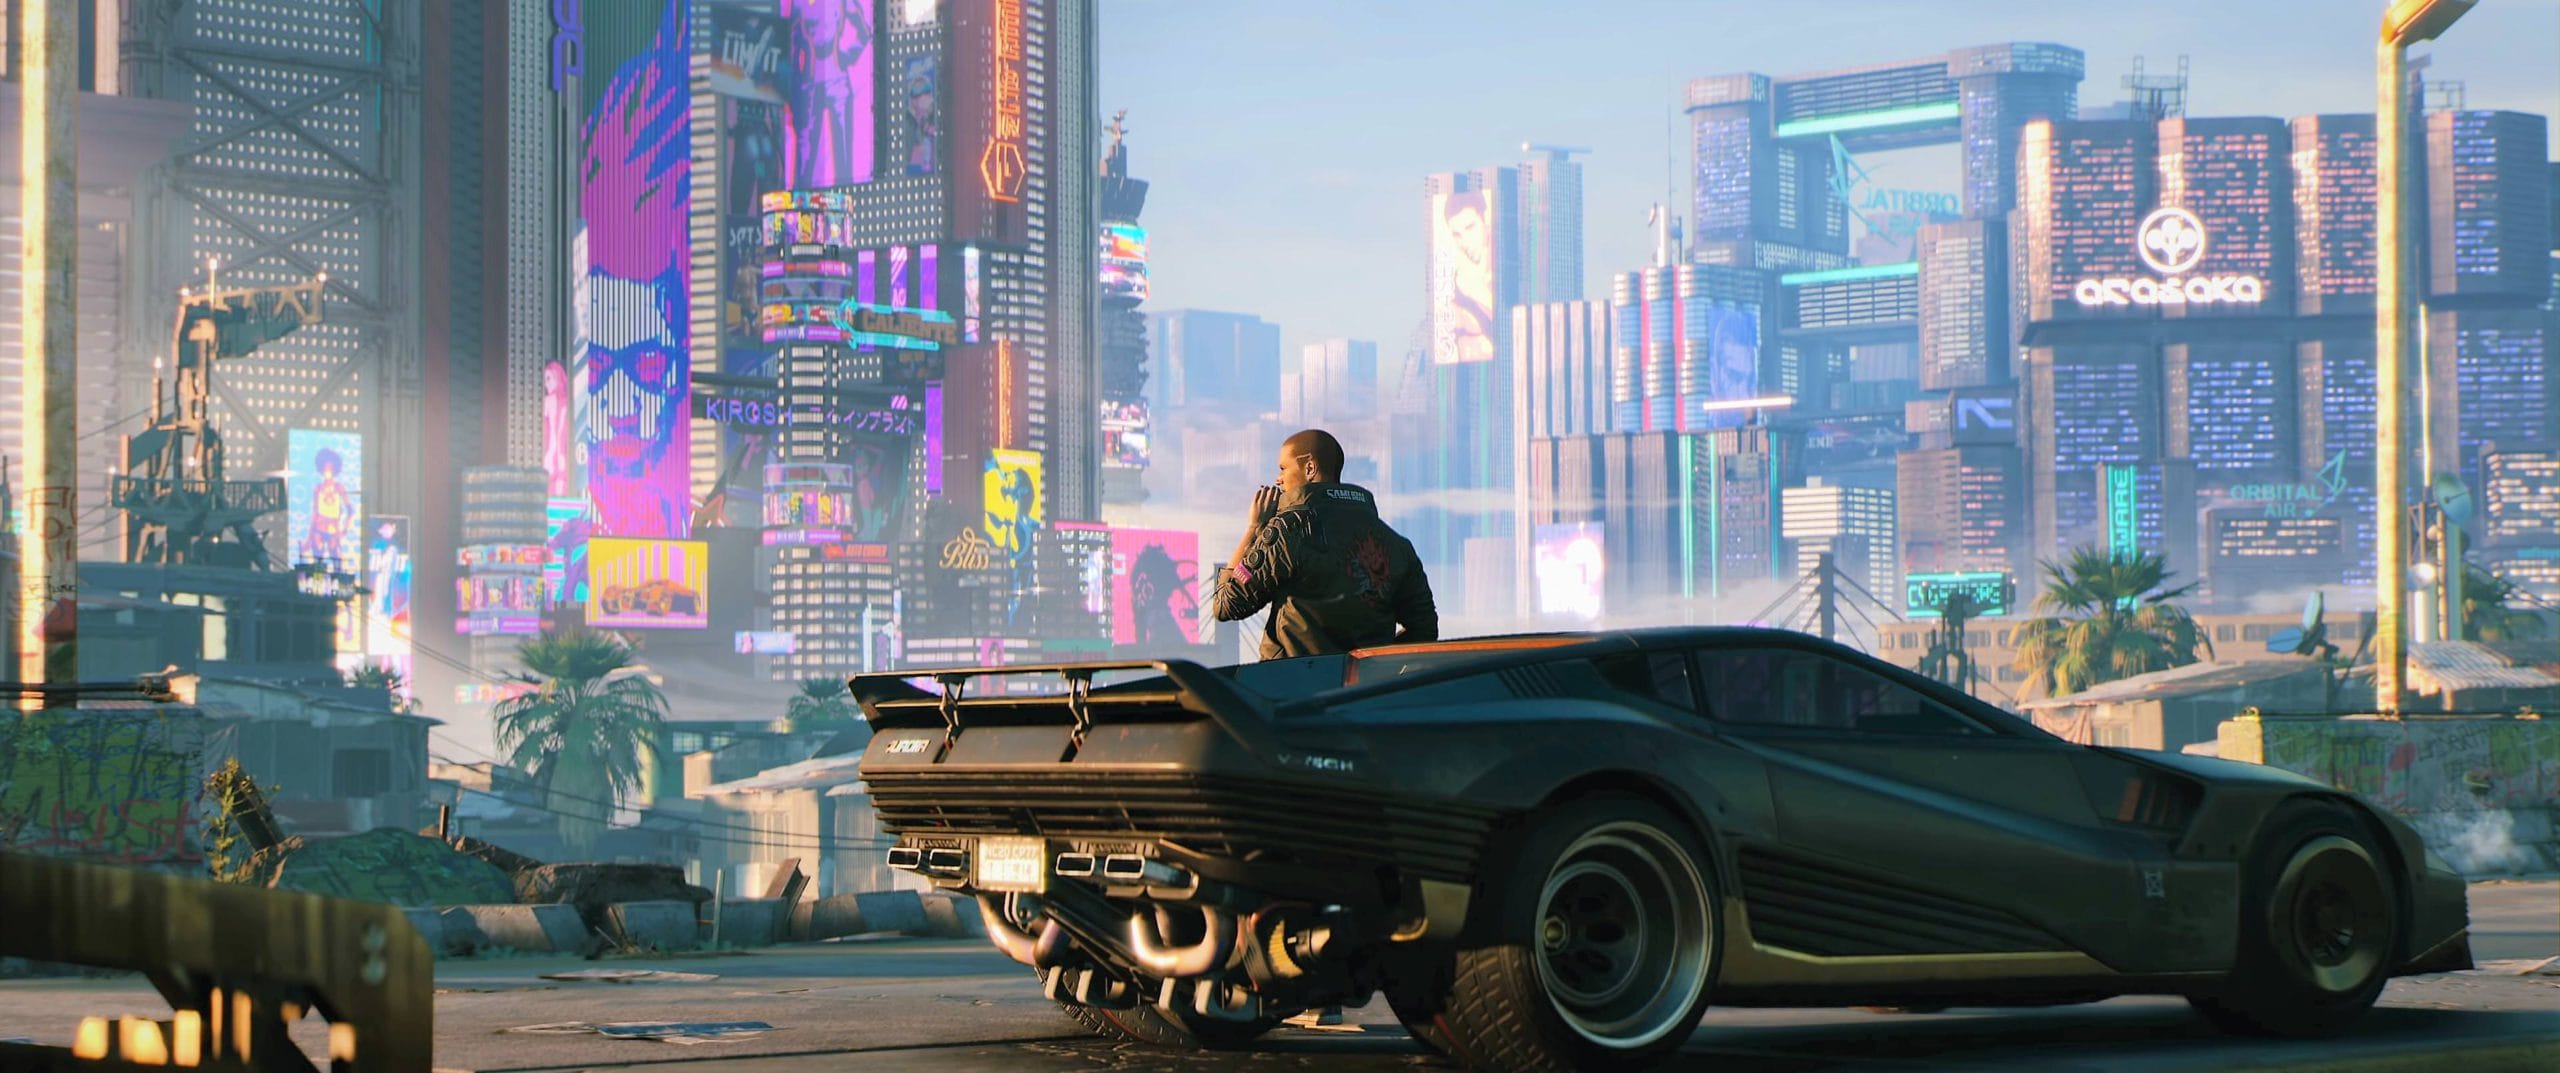 Cyberpunk 2077 Will Have More RPG Elements Than The Witcher 3